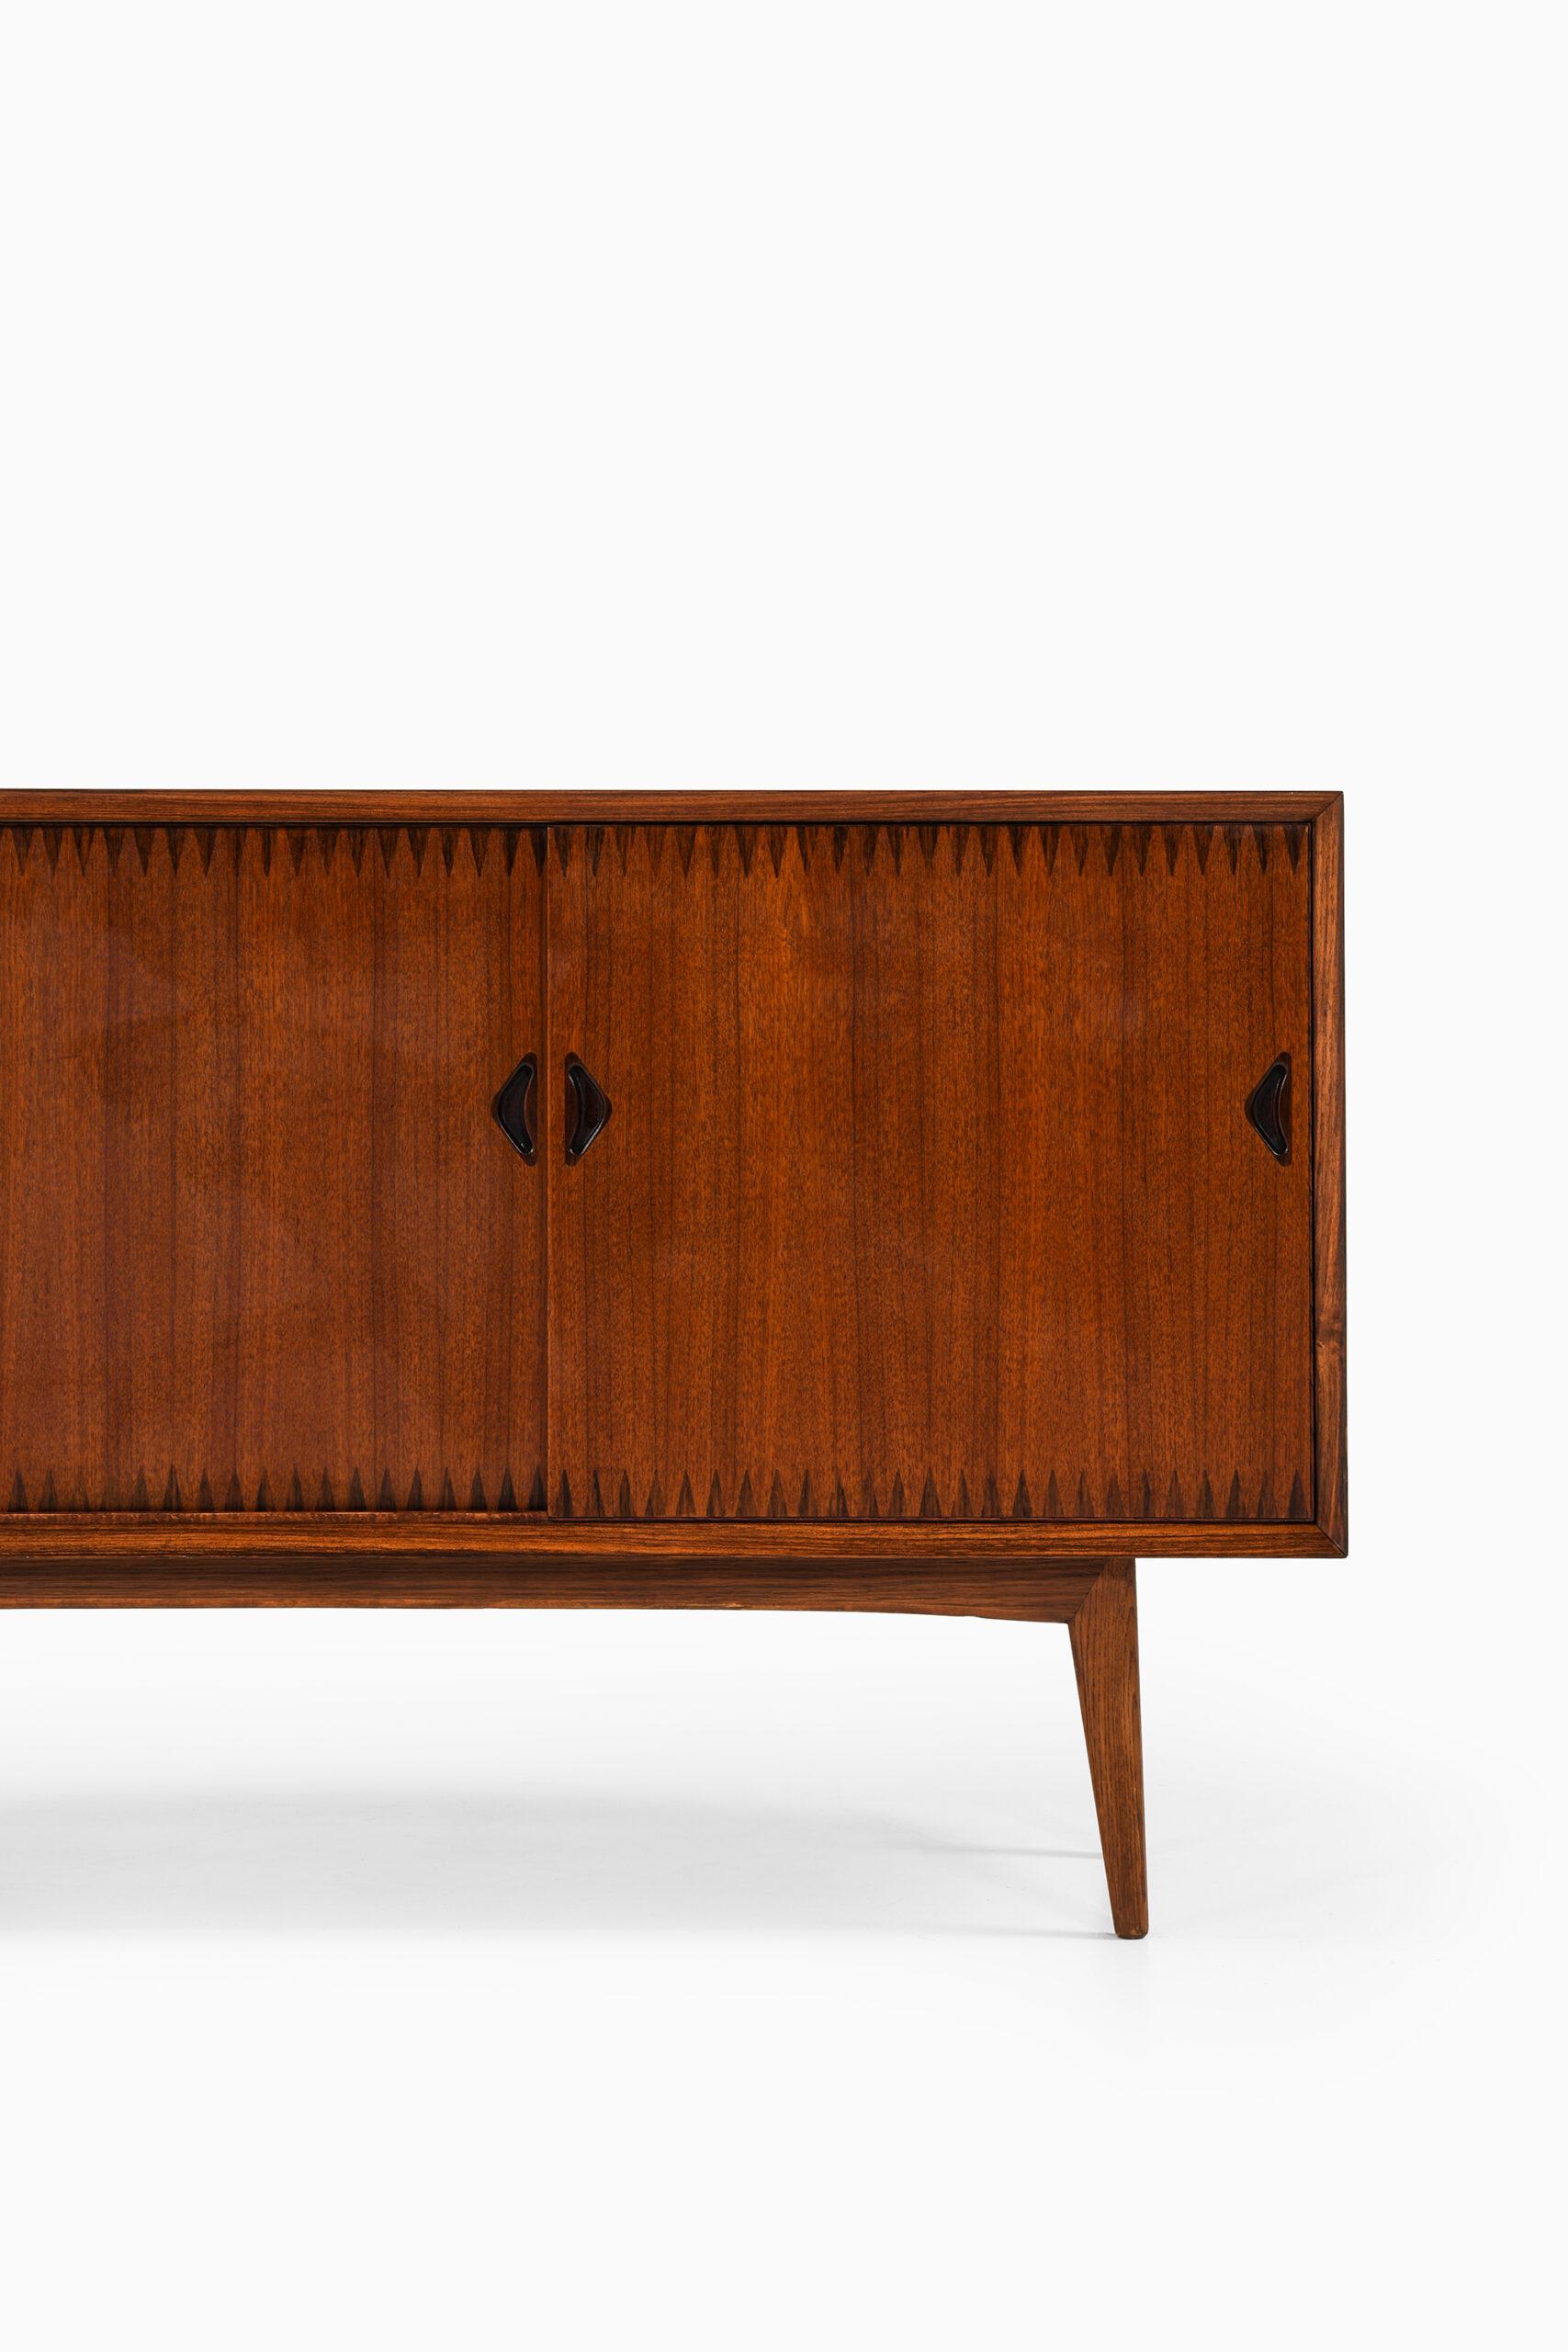 Rare sideboard by unknown designer. Probably produced in Sweden.